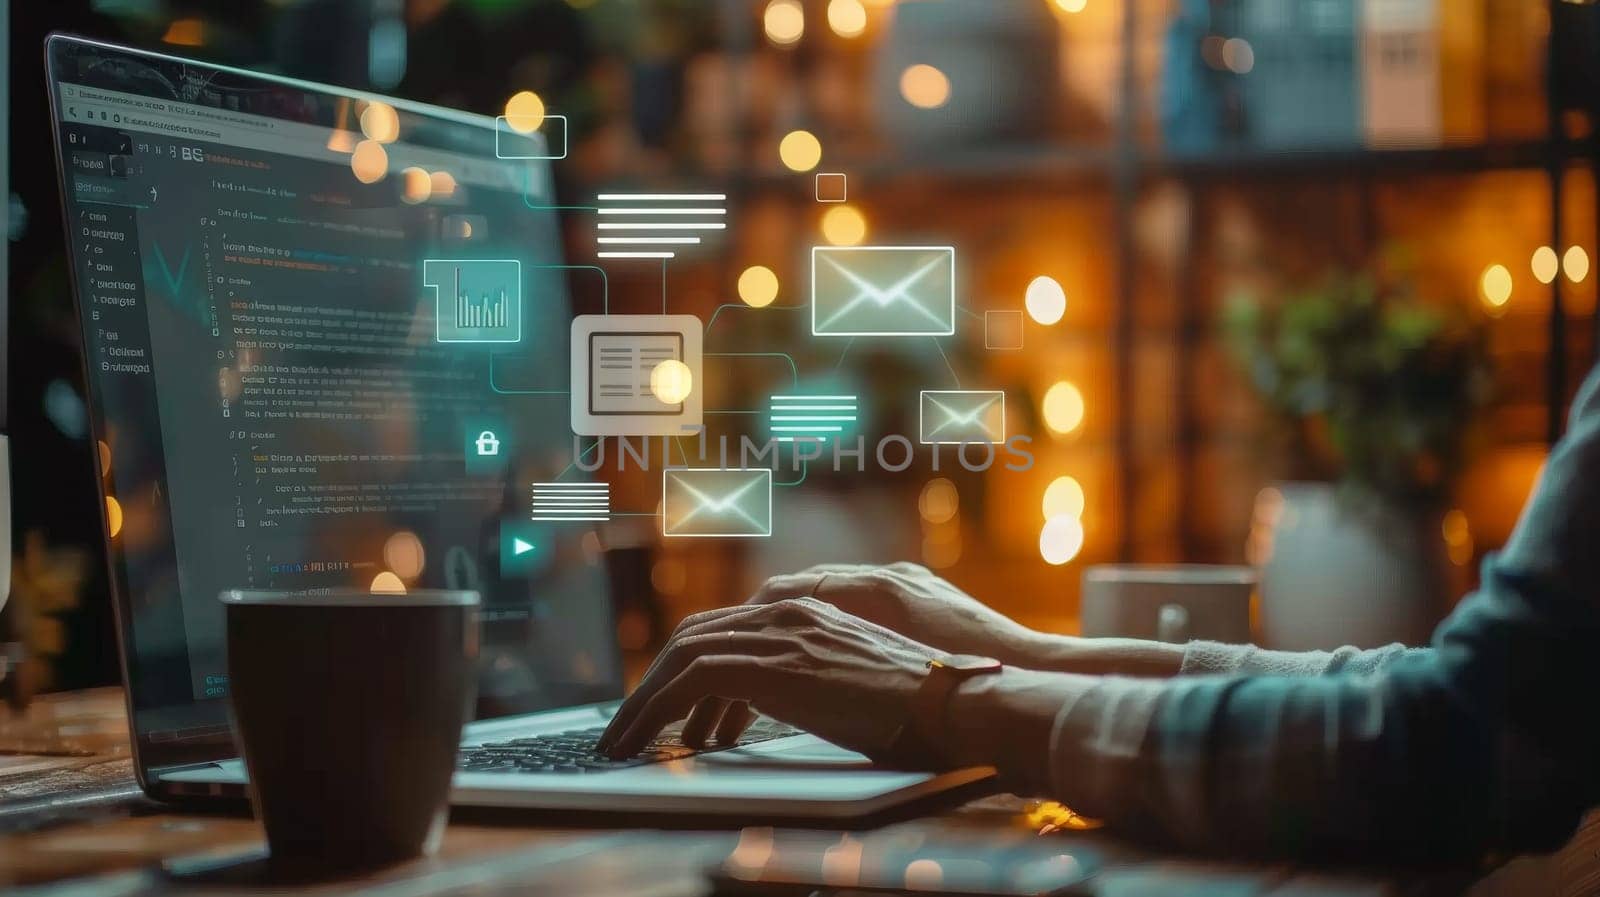 A person is typing on a laptop with a cup of coffee next to them. The laptop screen is filled with various icons and messages, including emails and a book. Concept of productivity and focus